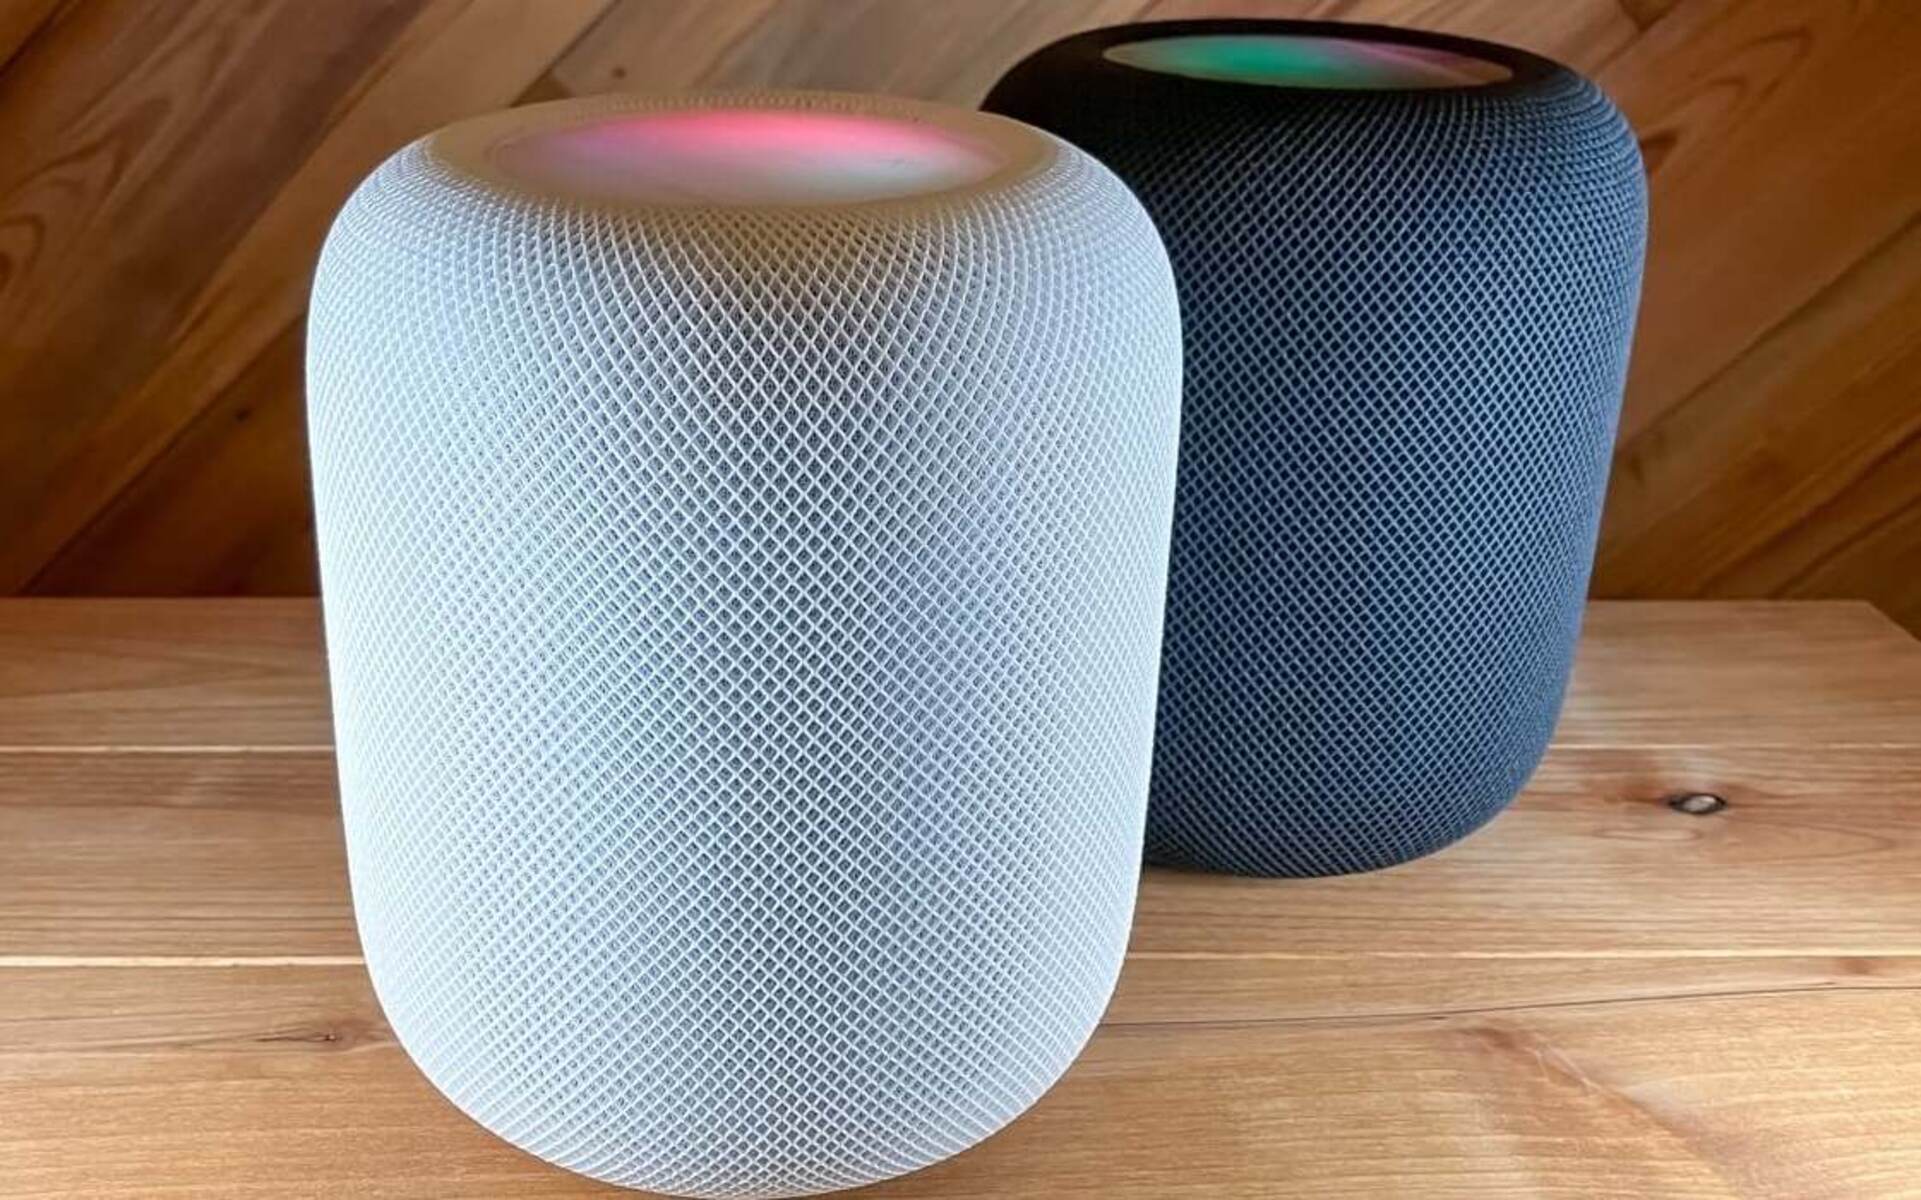 who-else-is-coming-out-with-a-smart-speaker